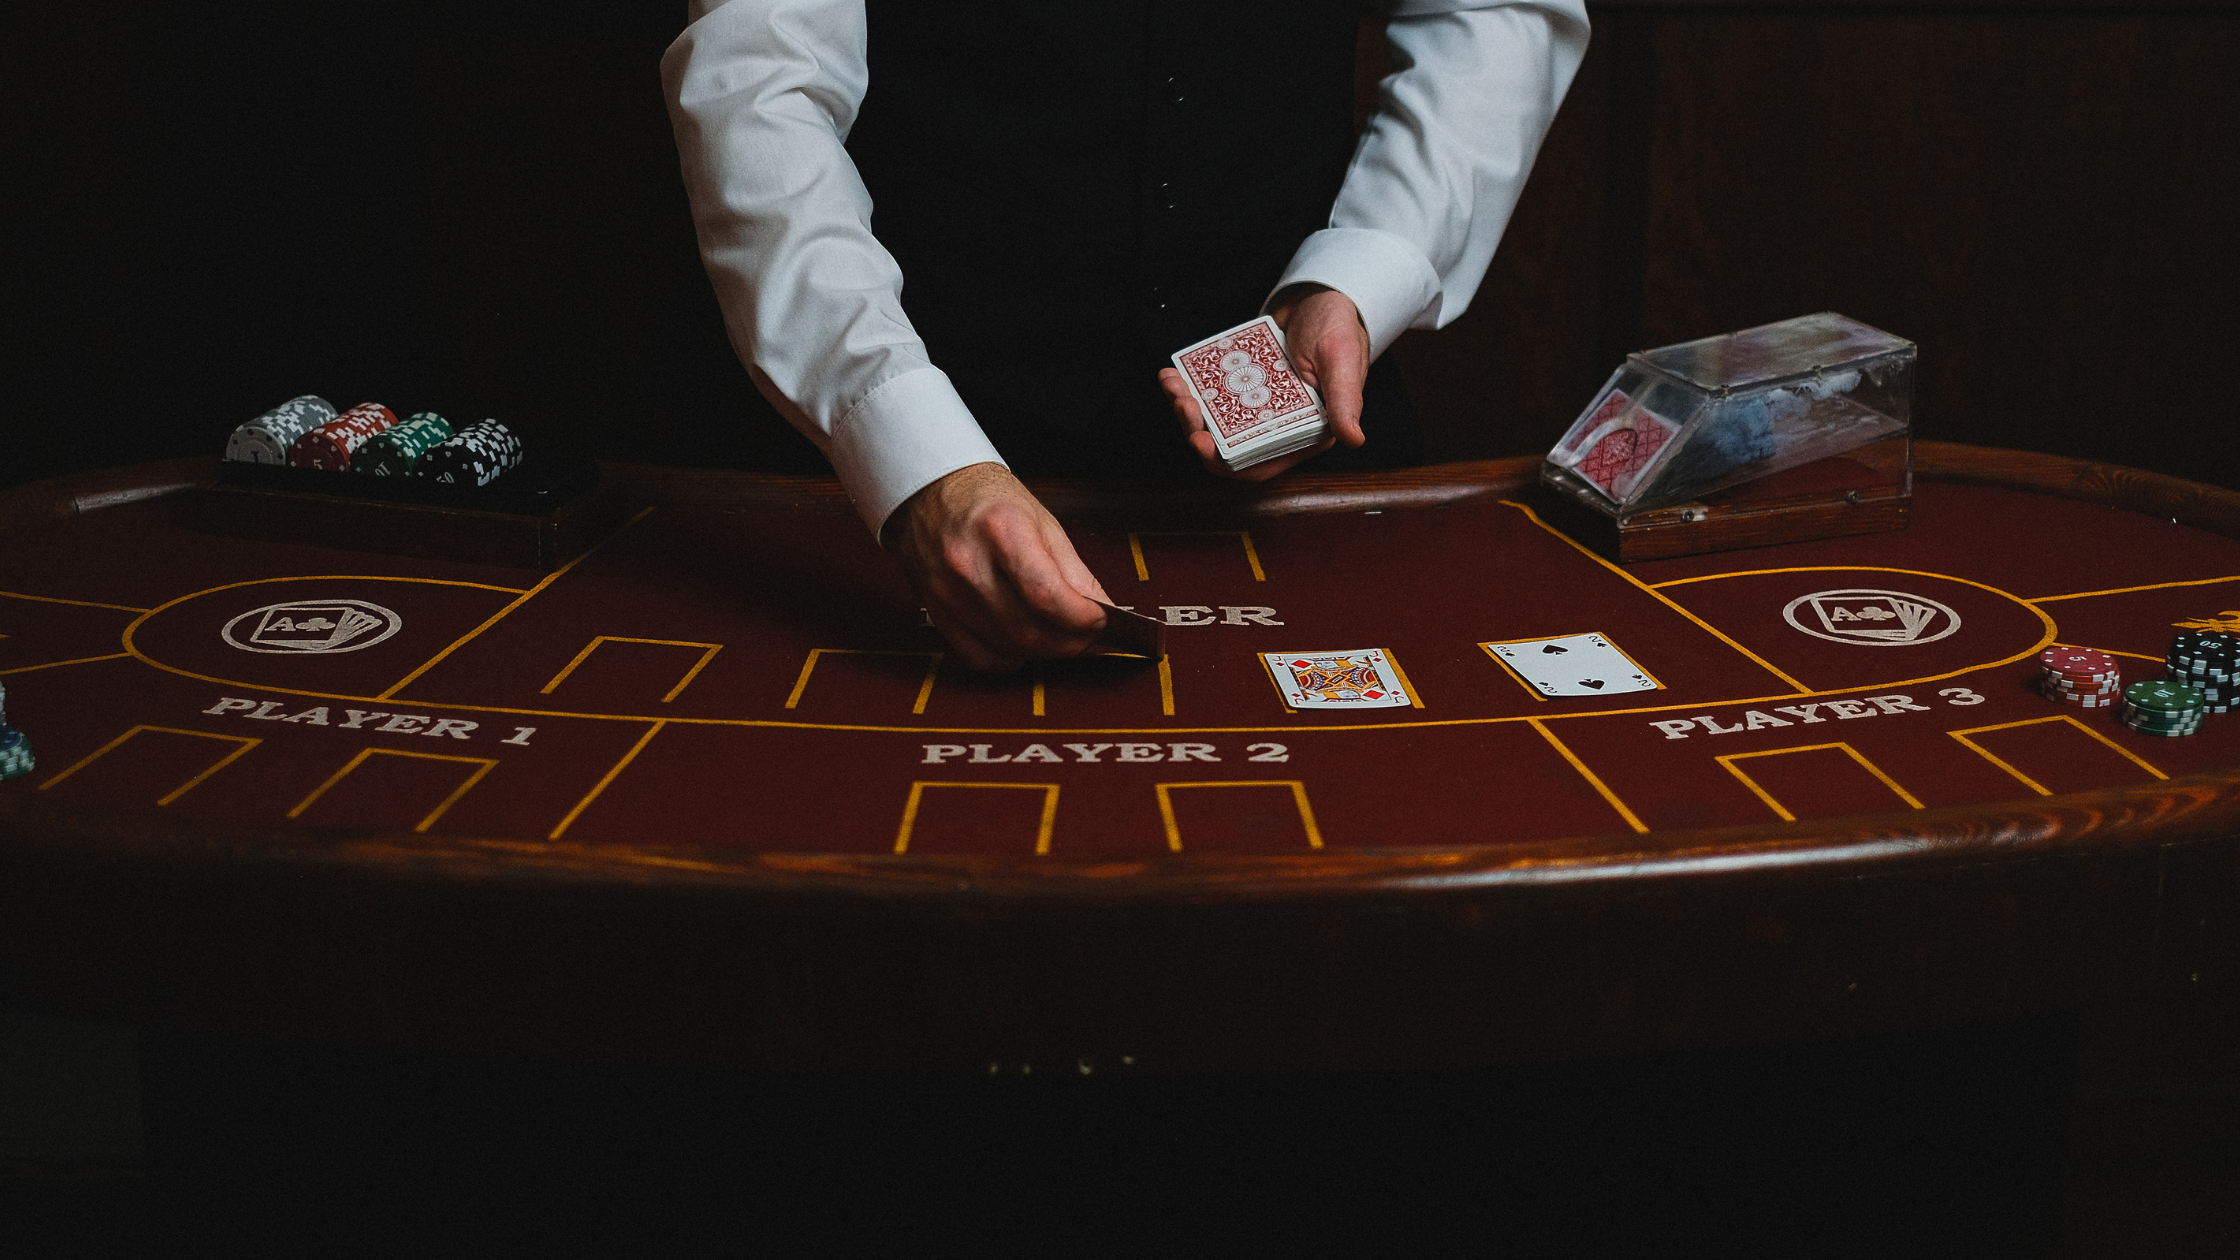 Online Poker and Slots: An Exciting New Way to Gamble